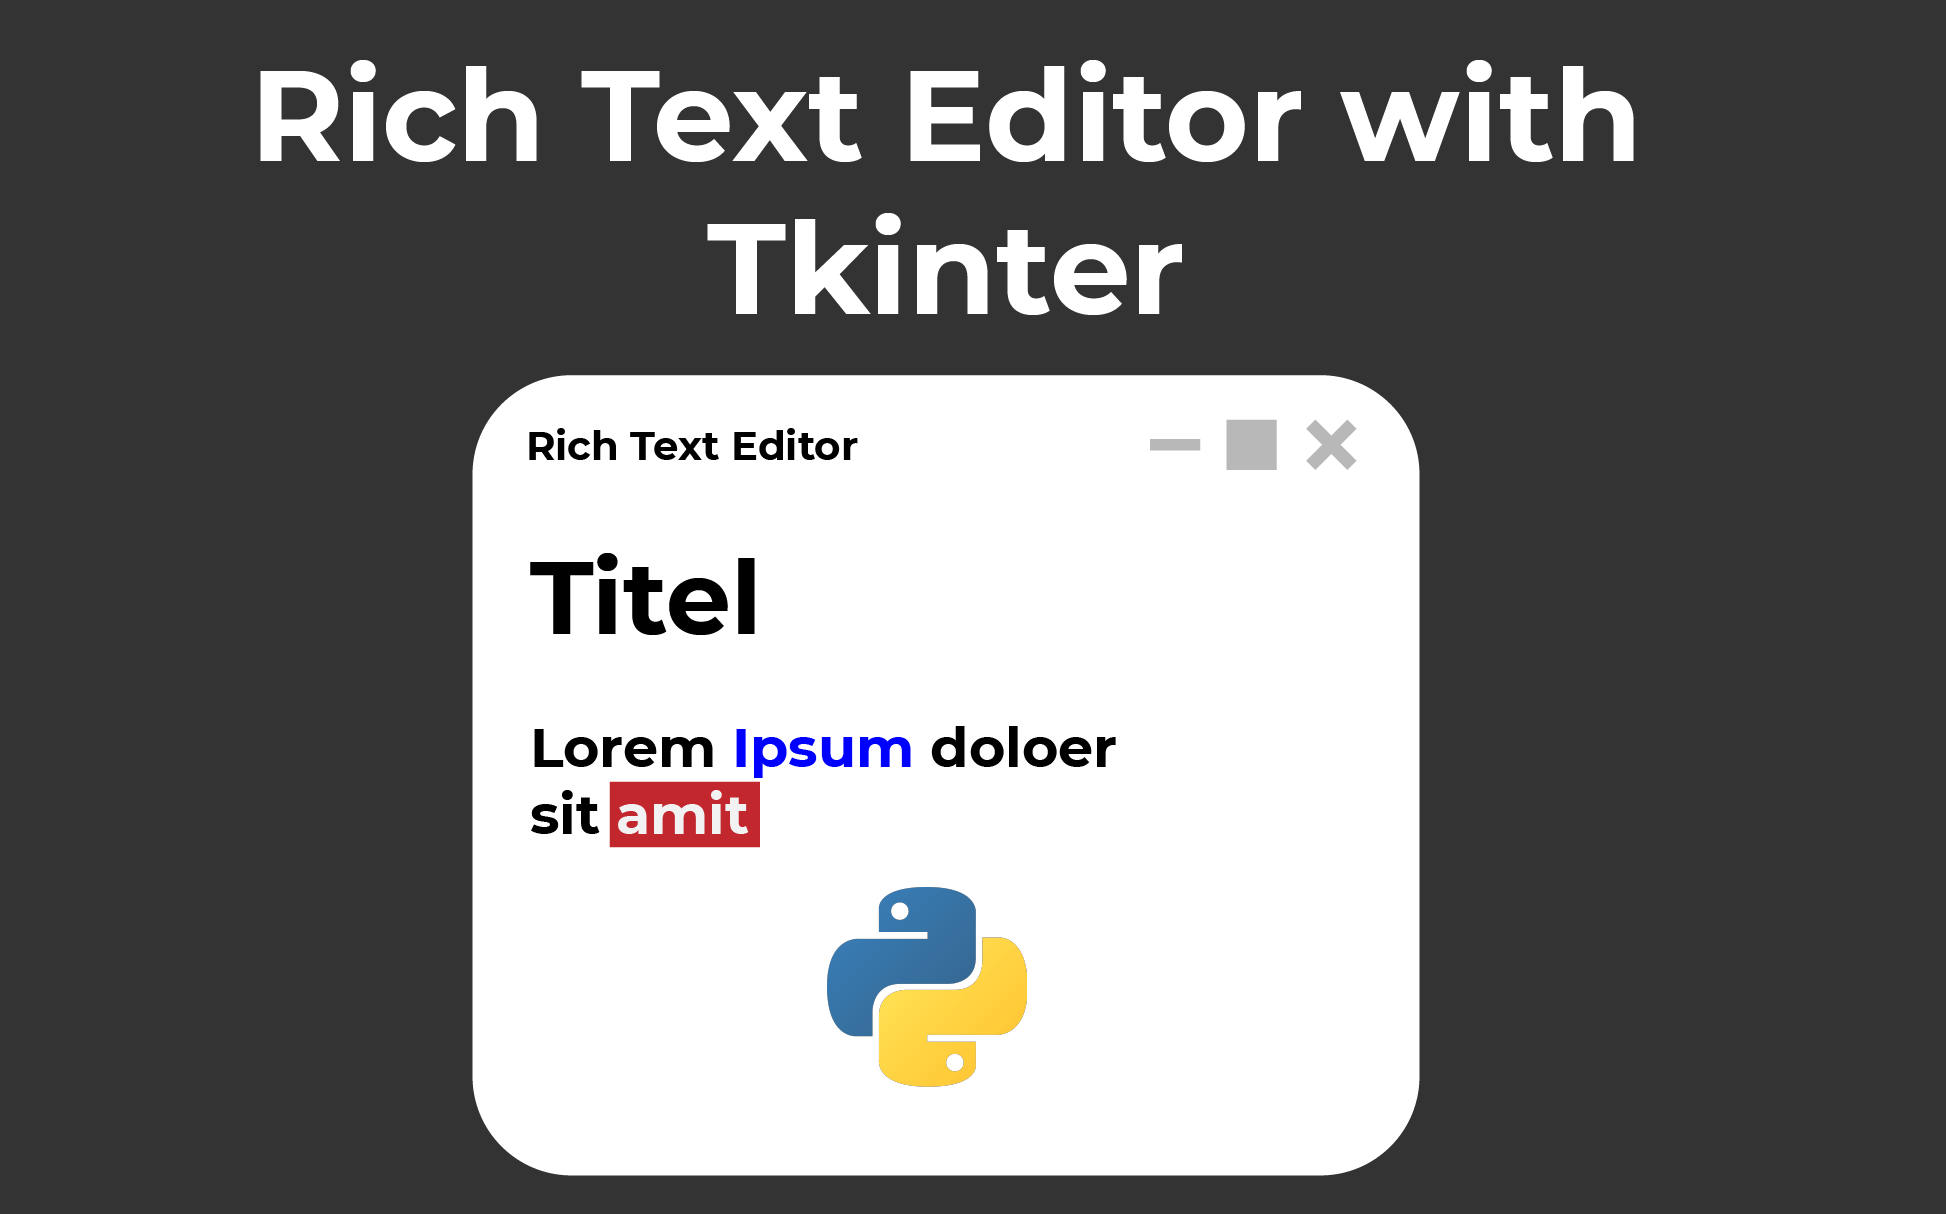 How to Make a Rich Text Editor with Tkinter in Python